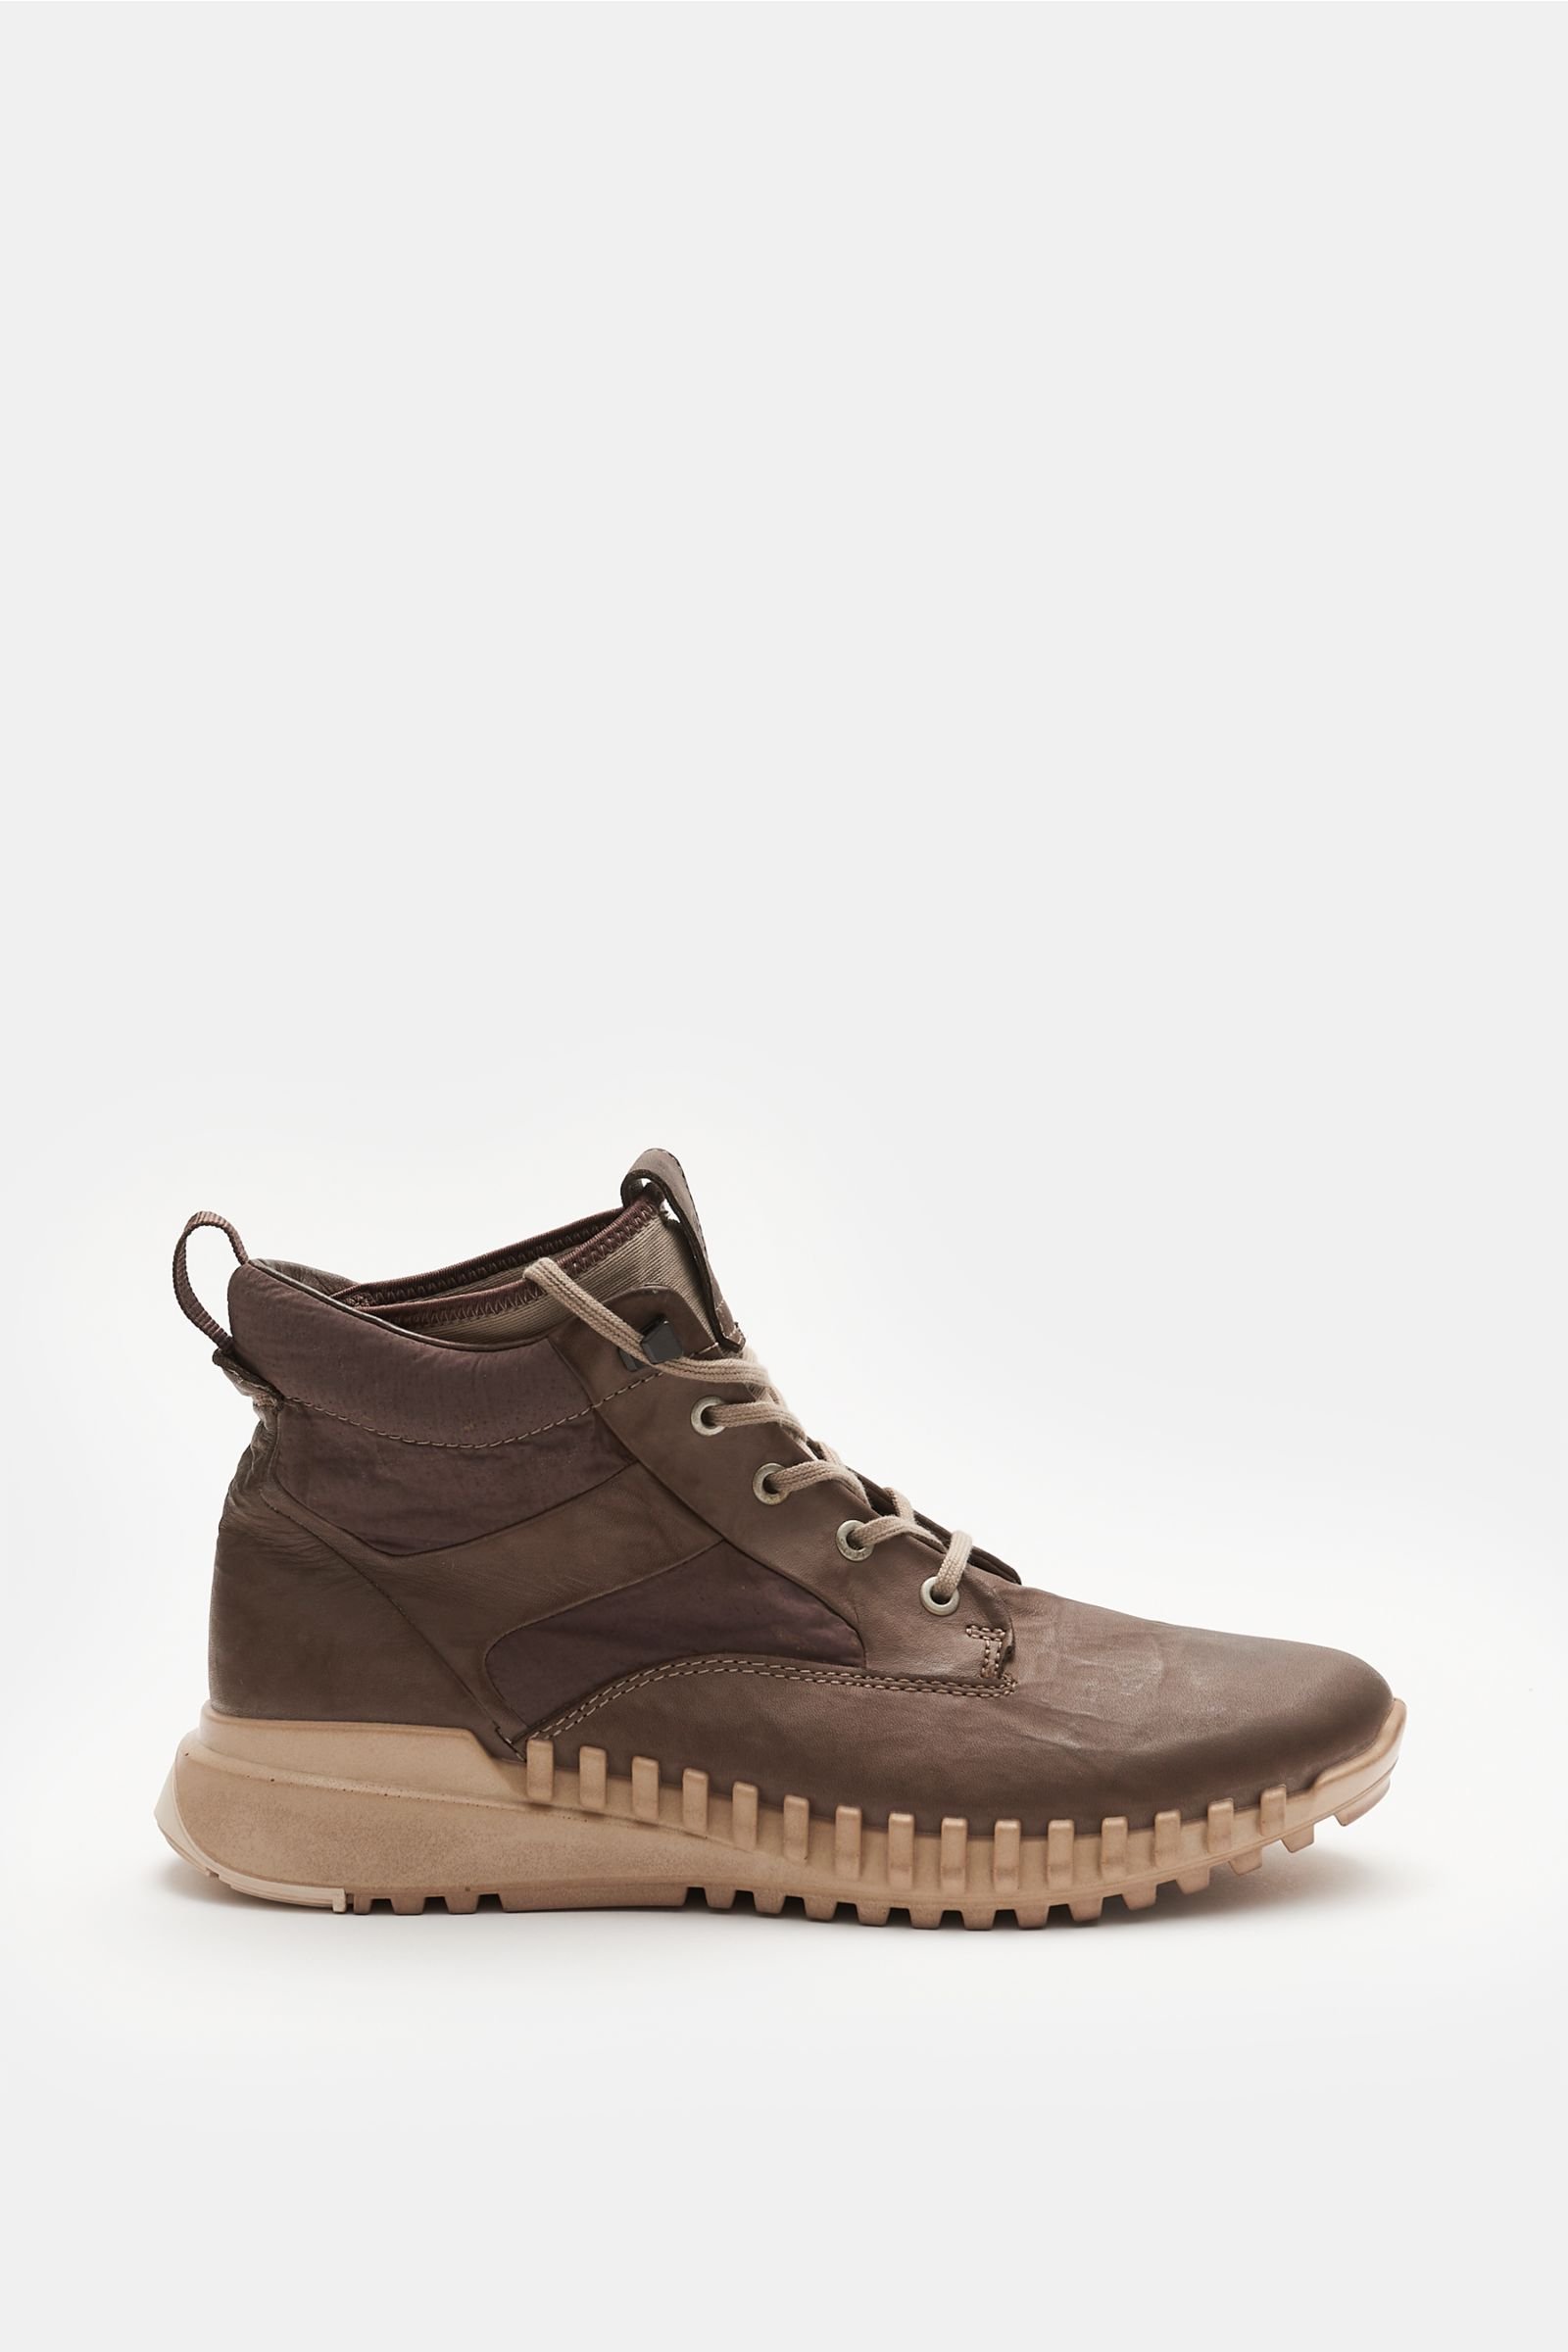 Lace-up boots 'Garment dyed Leather Exostrike Boot with Dyneema' grey-brown